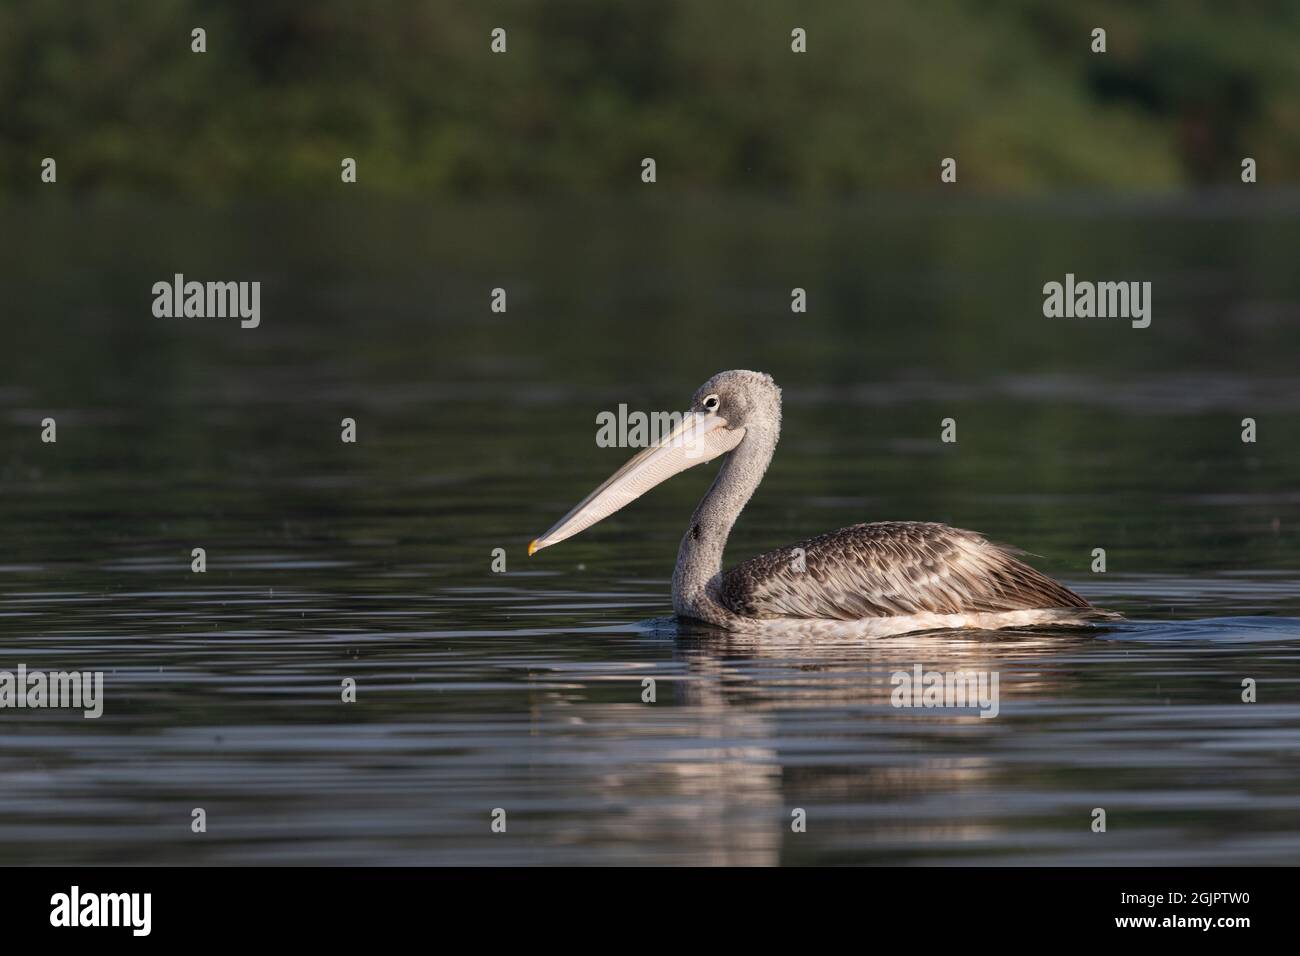 A rosy pelican swims on the Nile River in Uganda. Stock Photo